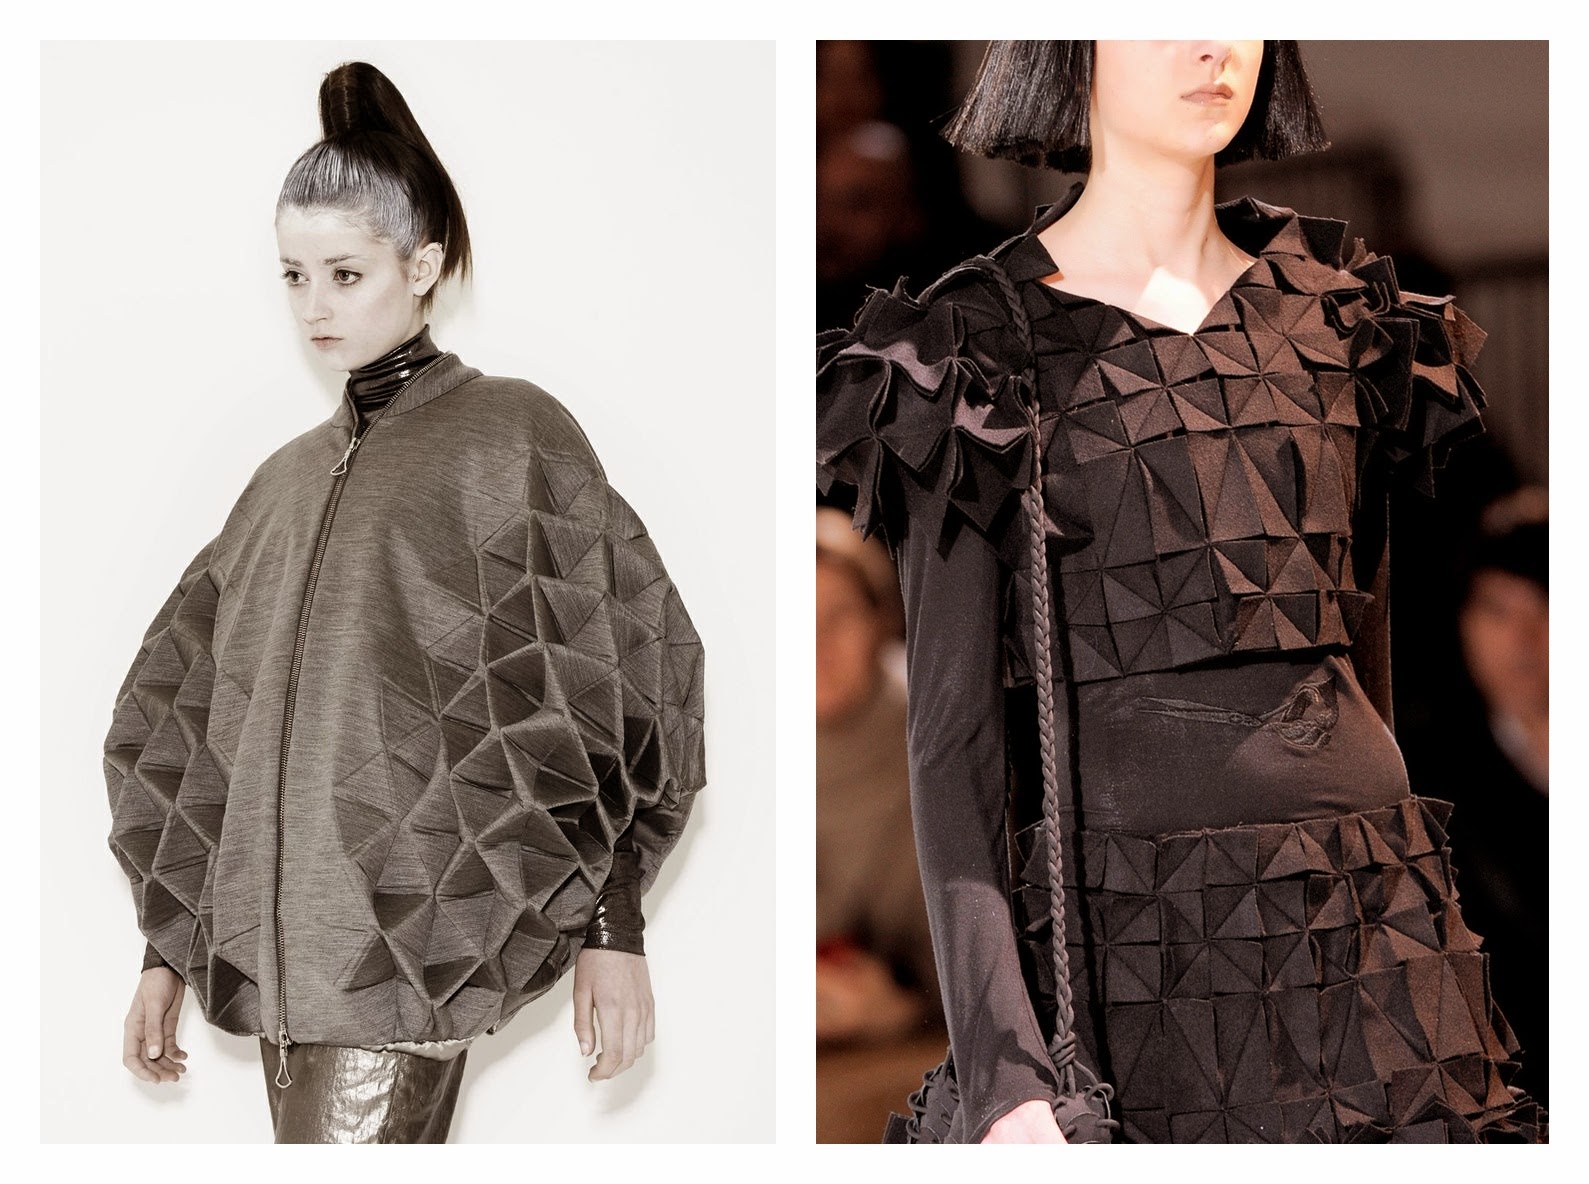 Origami and geometric clothing | Black Hex